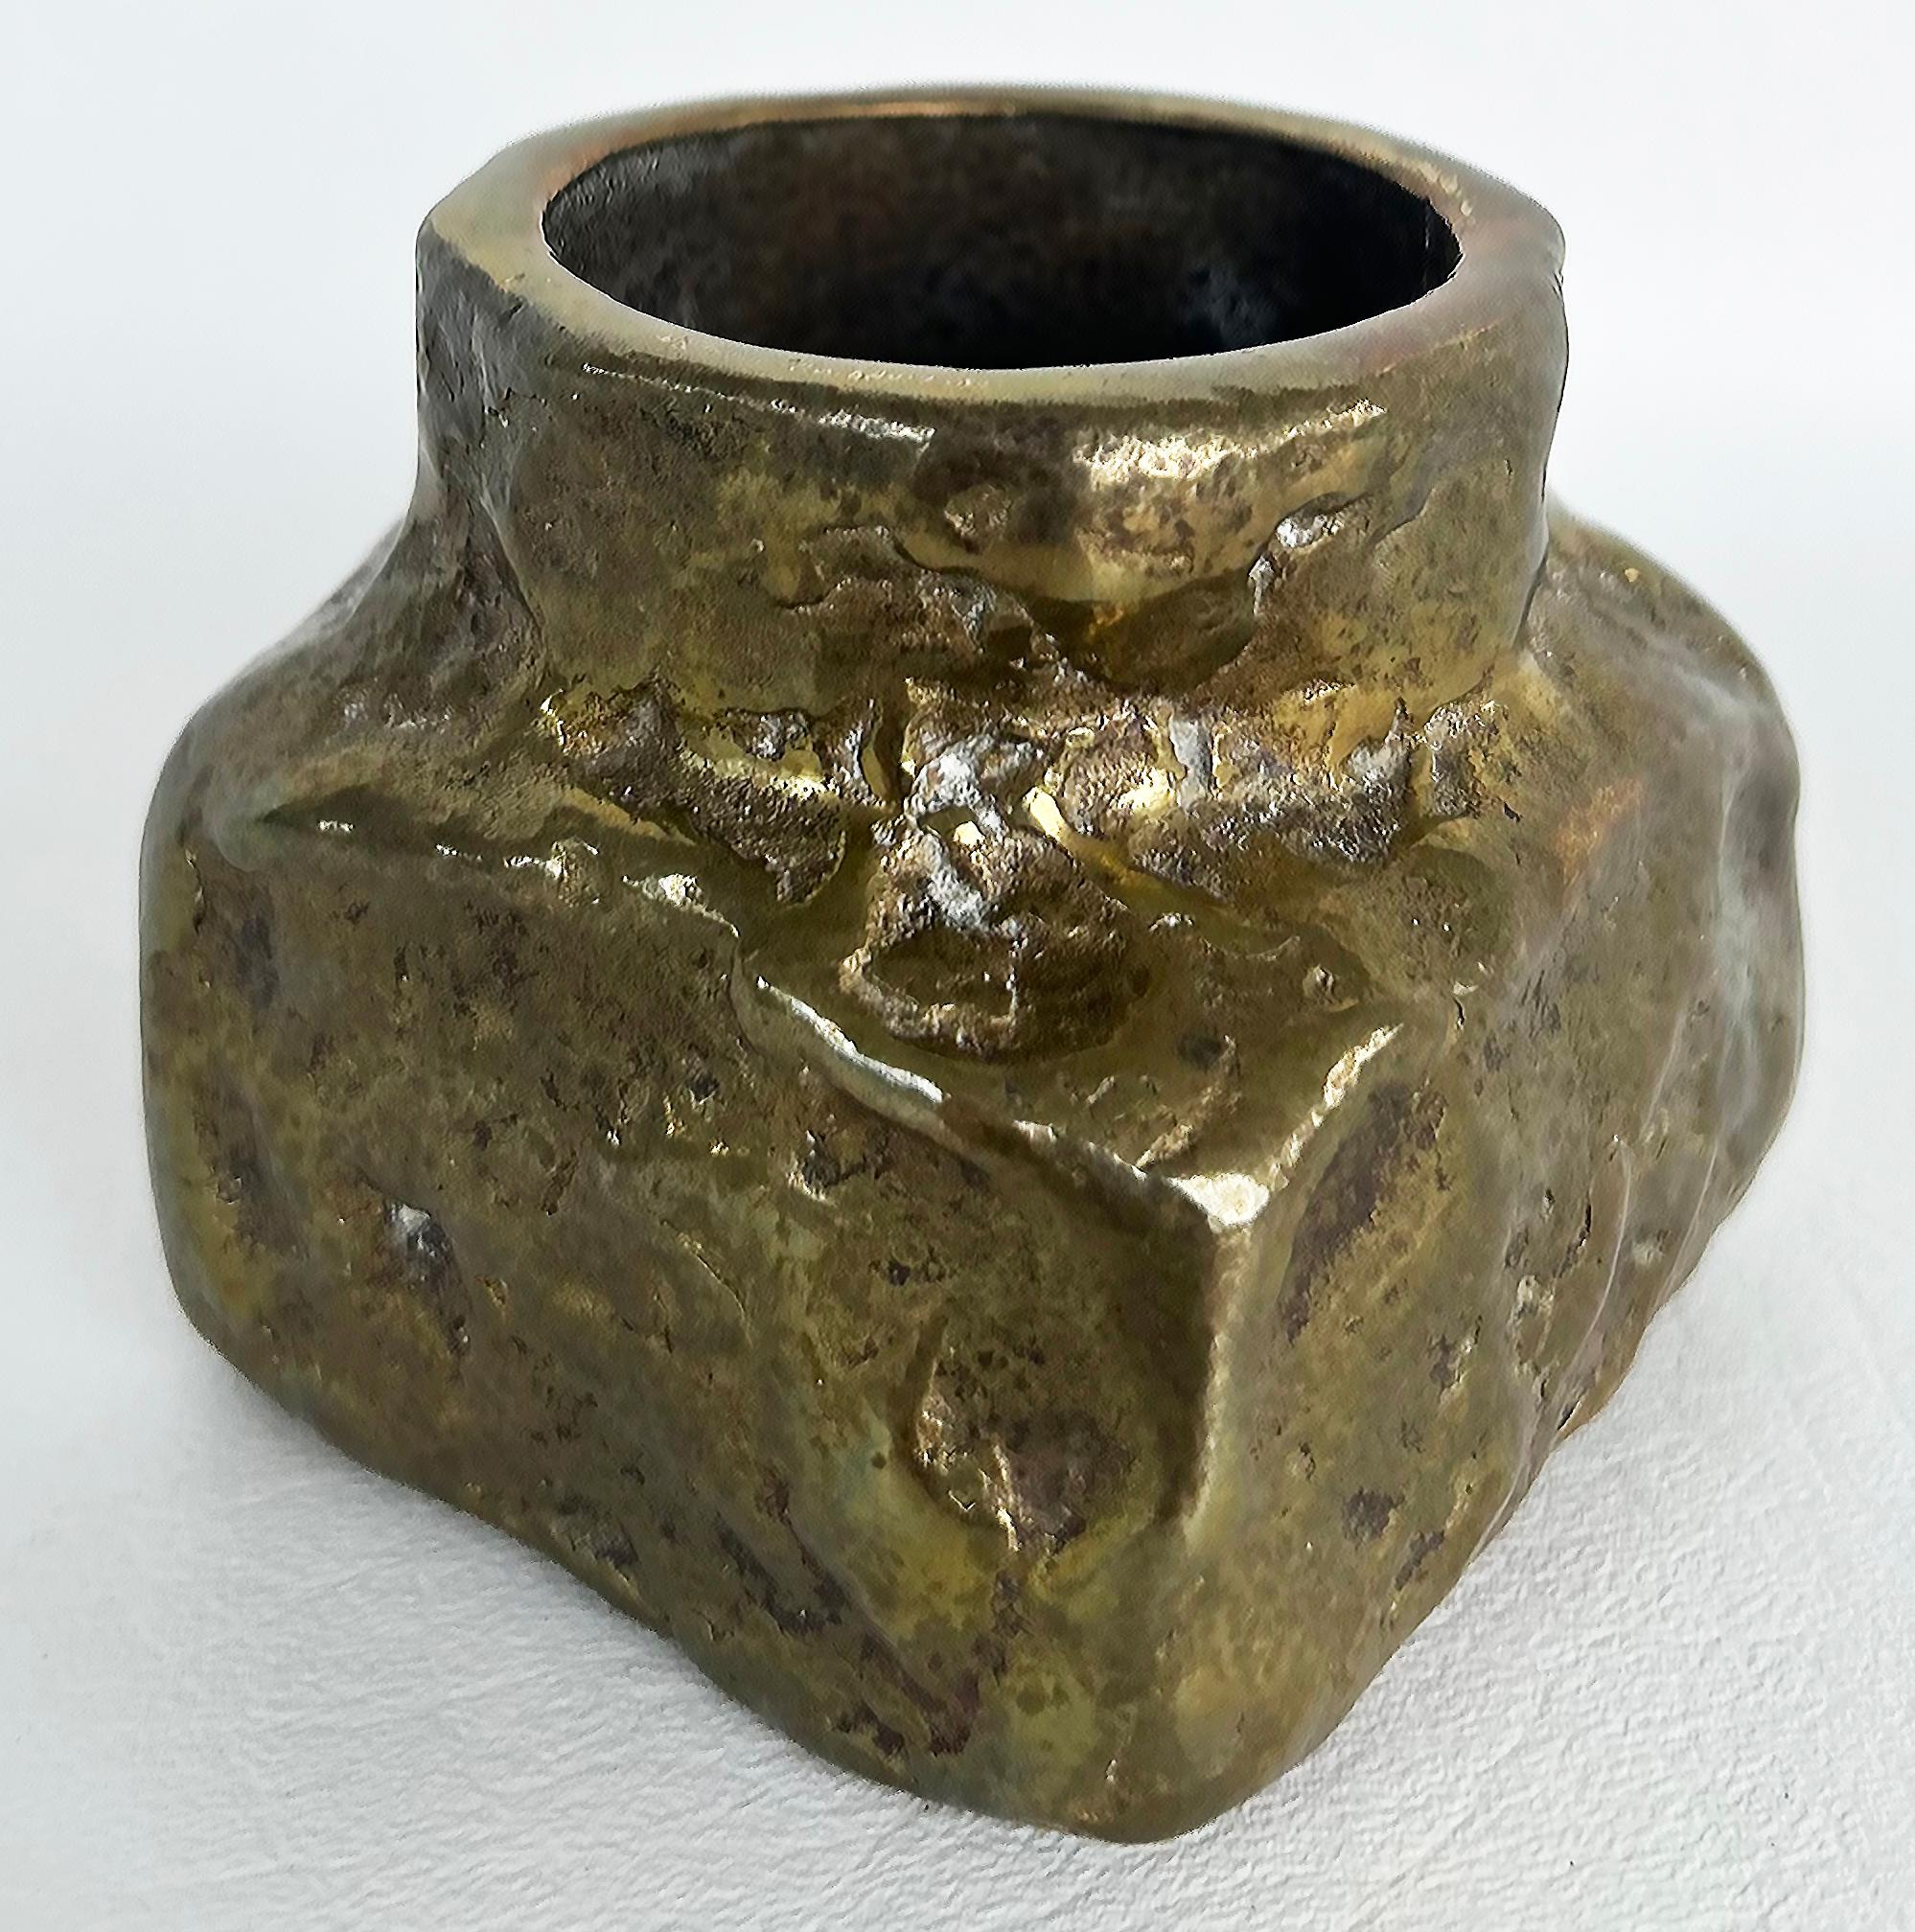 Sculptural Bronze Free-form Inkwell from a New York Socialite Estate

Offered for sale is a sculptural bronze free-form inkwell from the estate of a New York socialite.  She had multiple residences and was a gallery owner in Manhattan in the 1960s